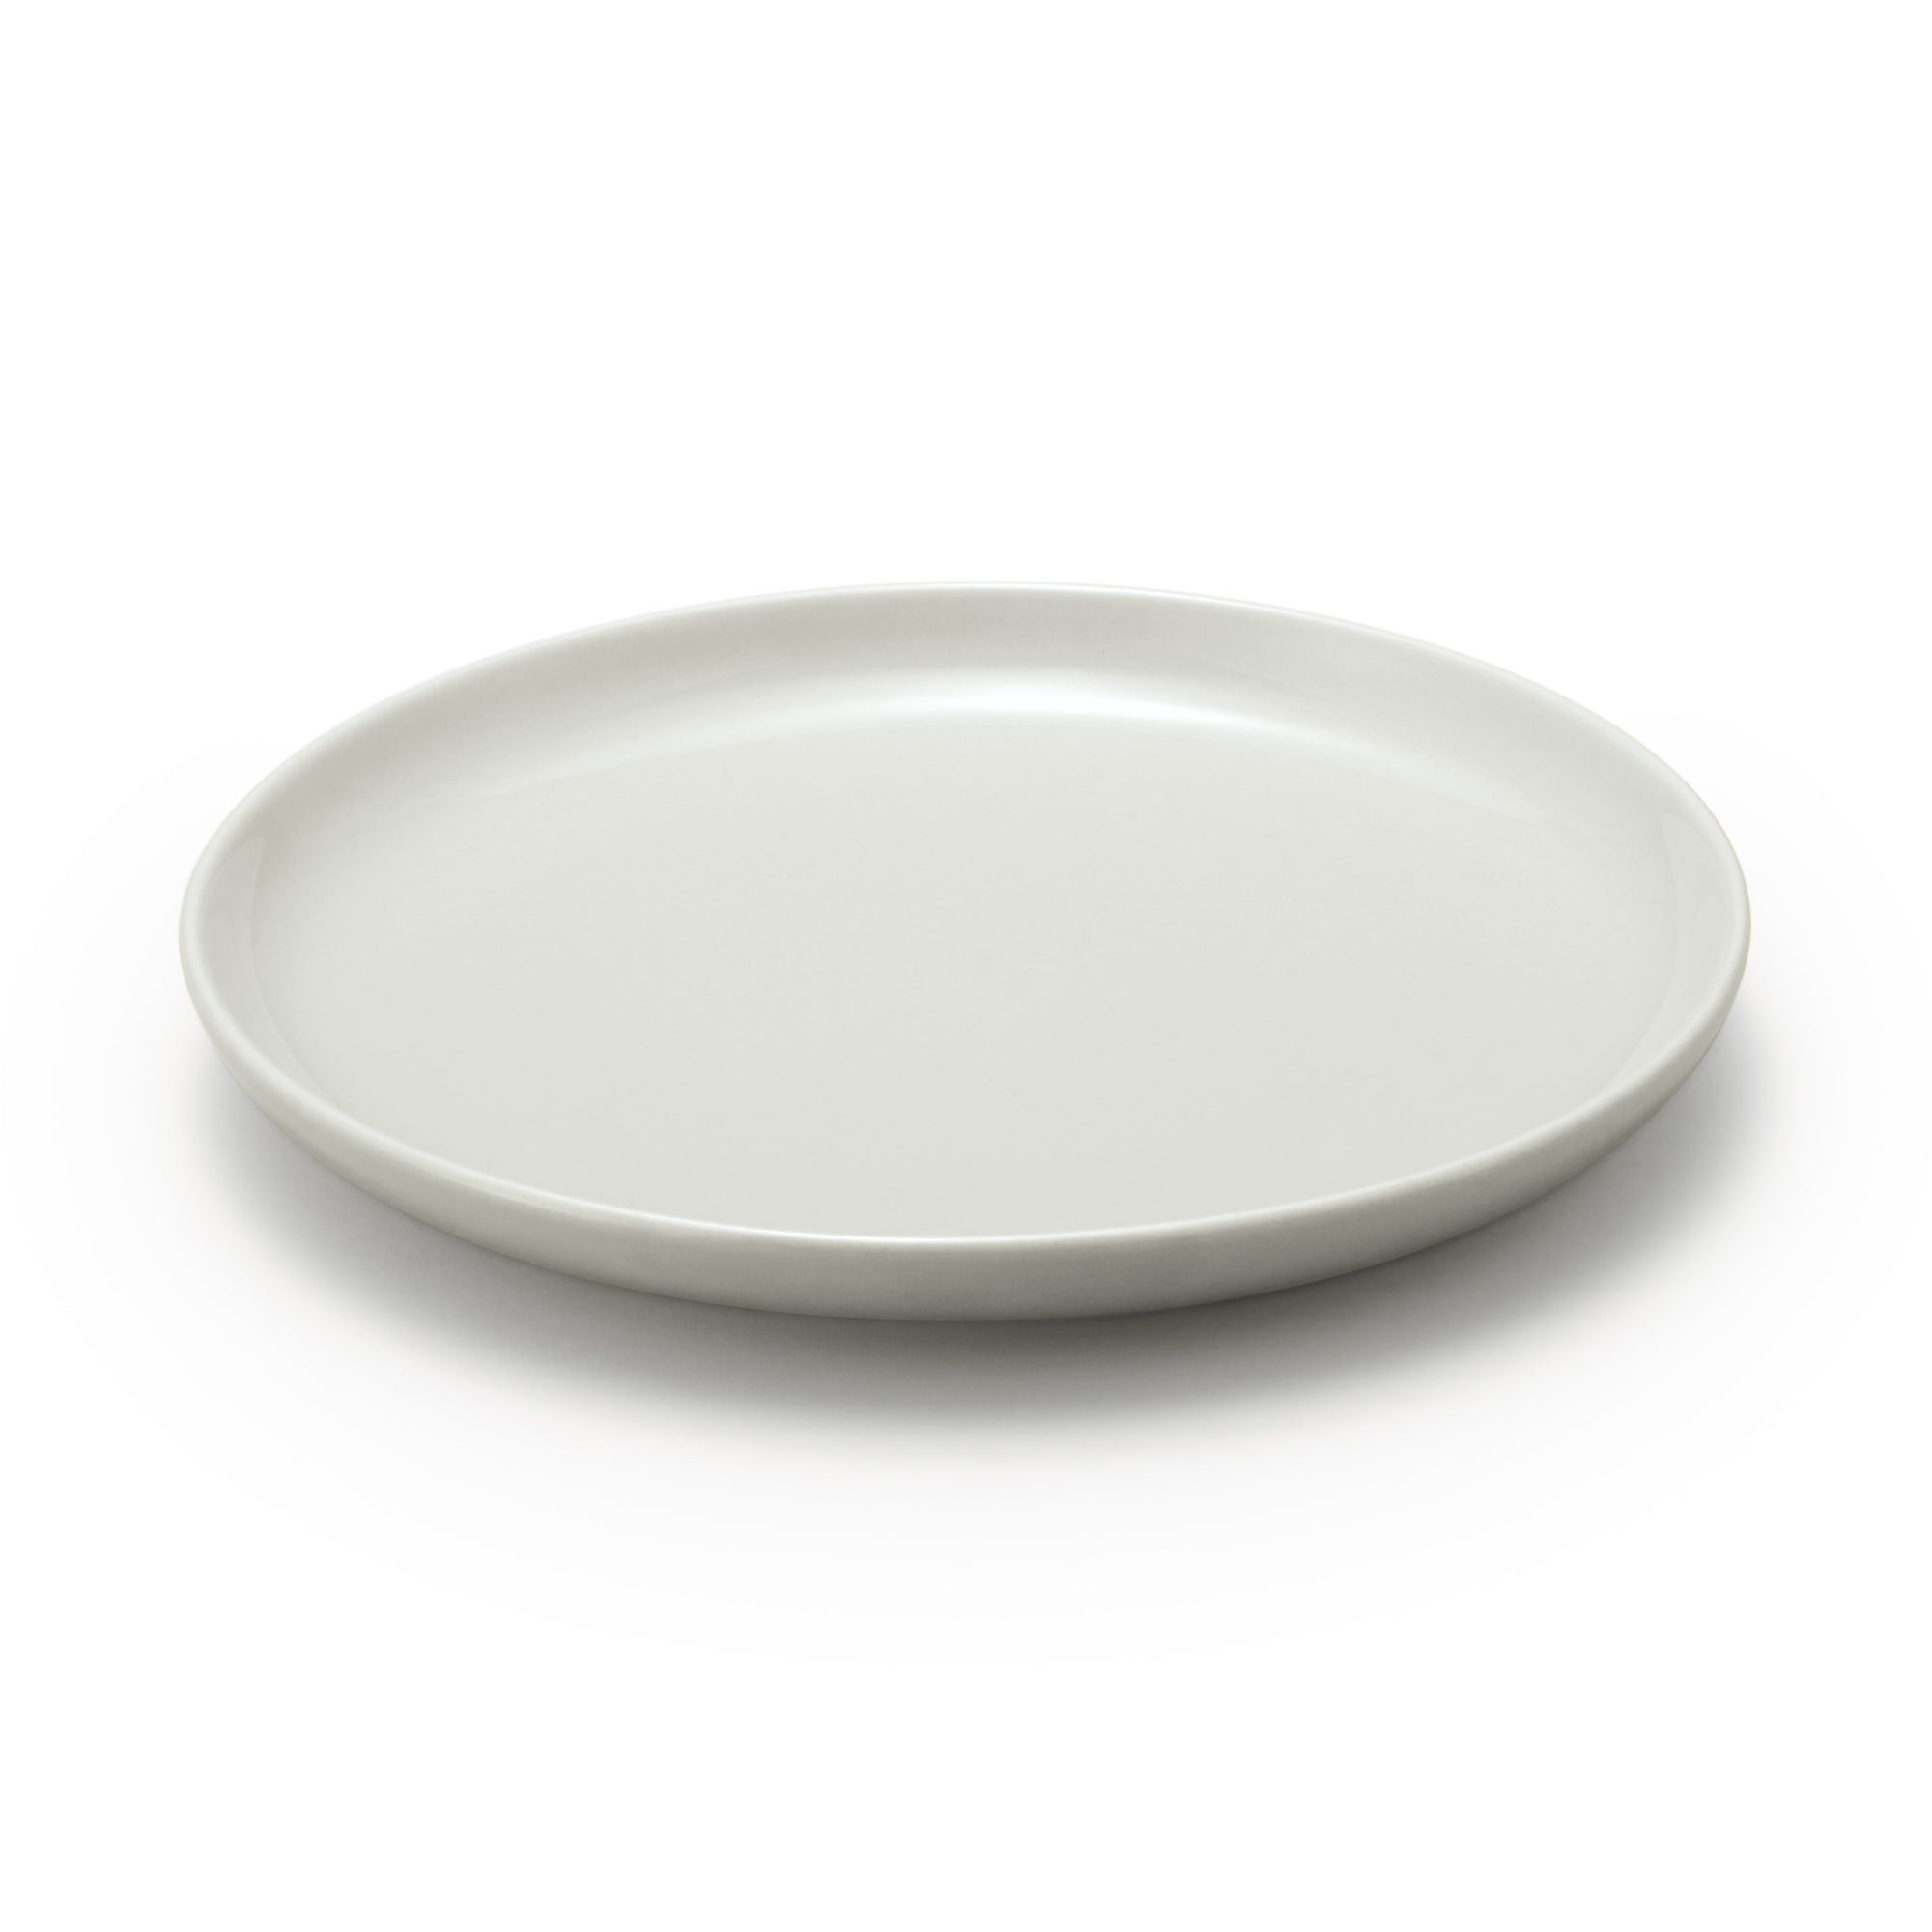 Everyday Tableware Appetizer Plate